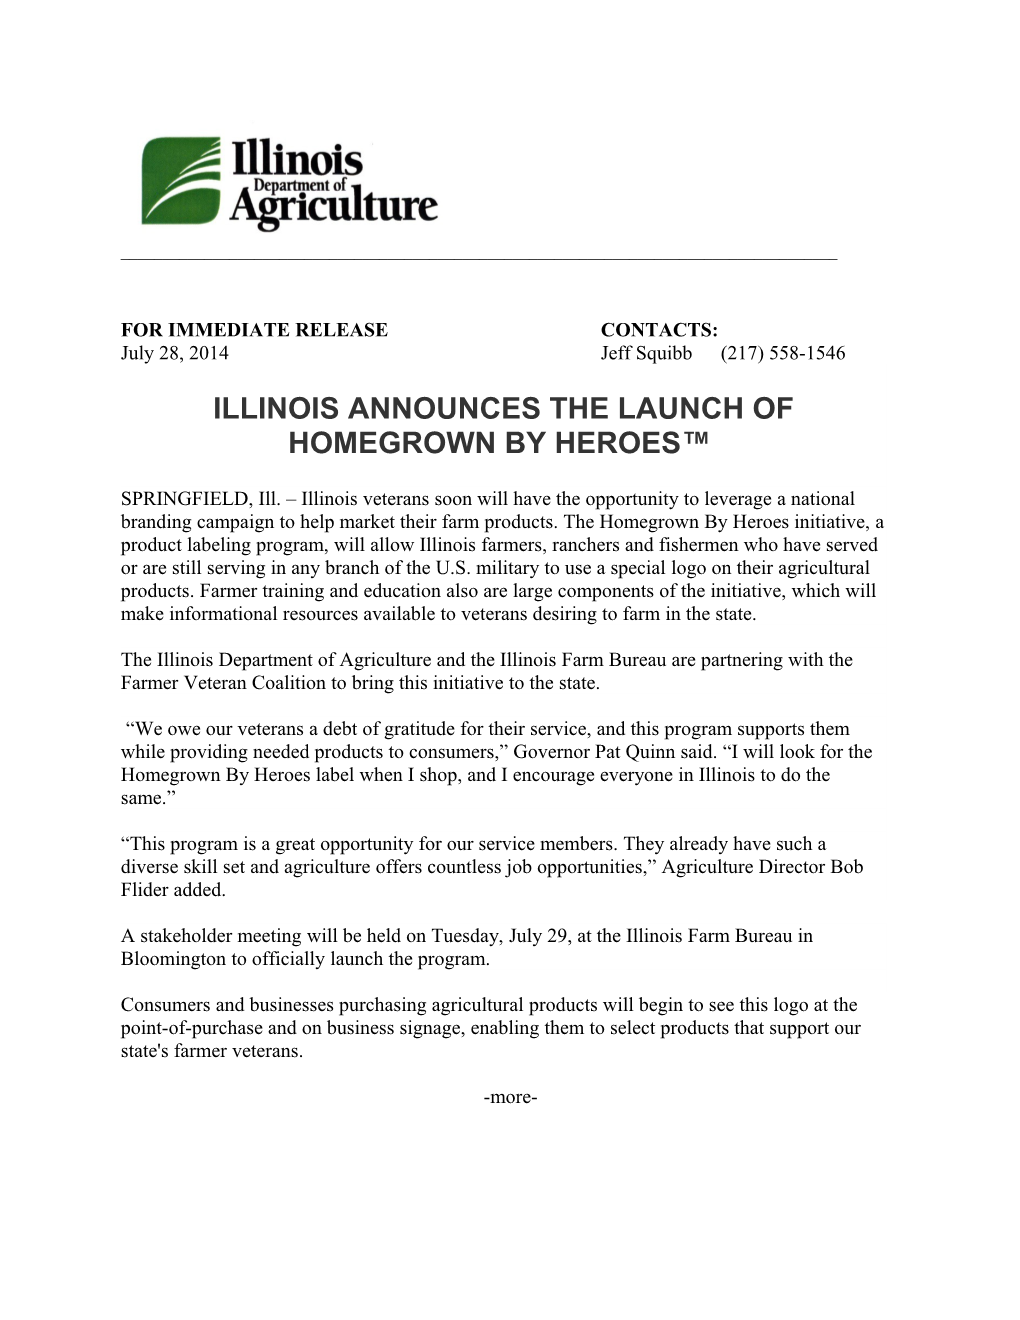 Illinois Announces the Launch of Homegrown by Heroes